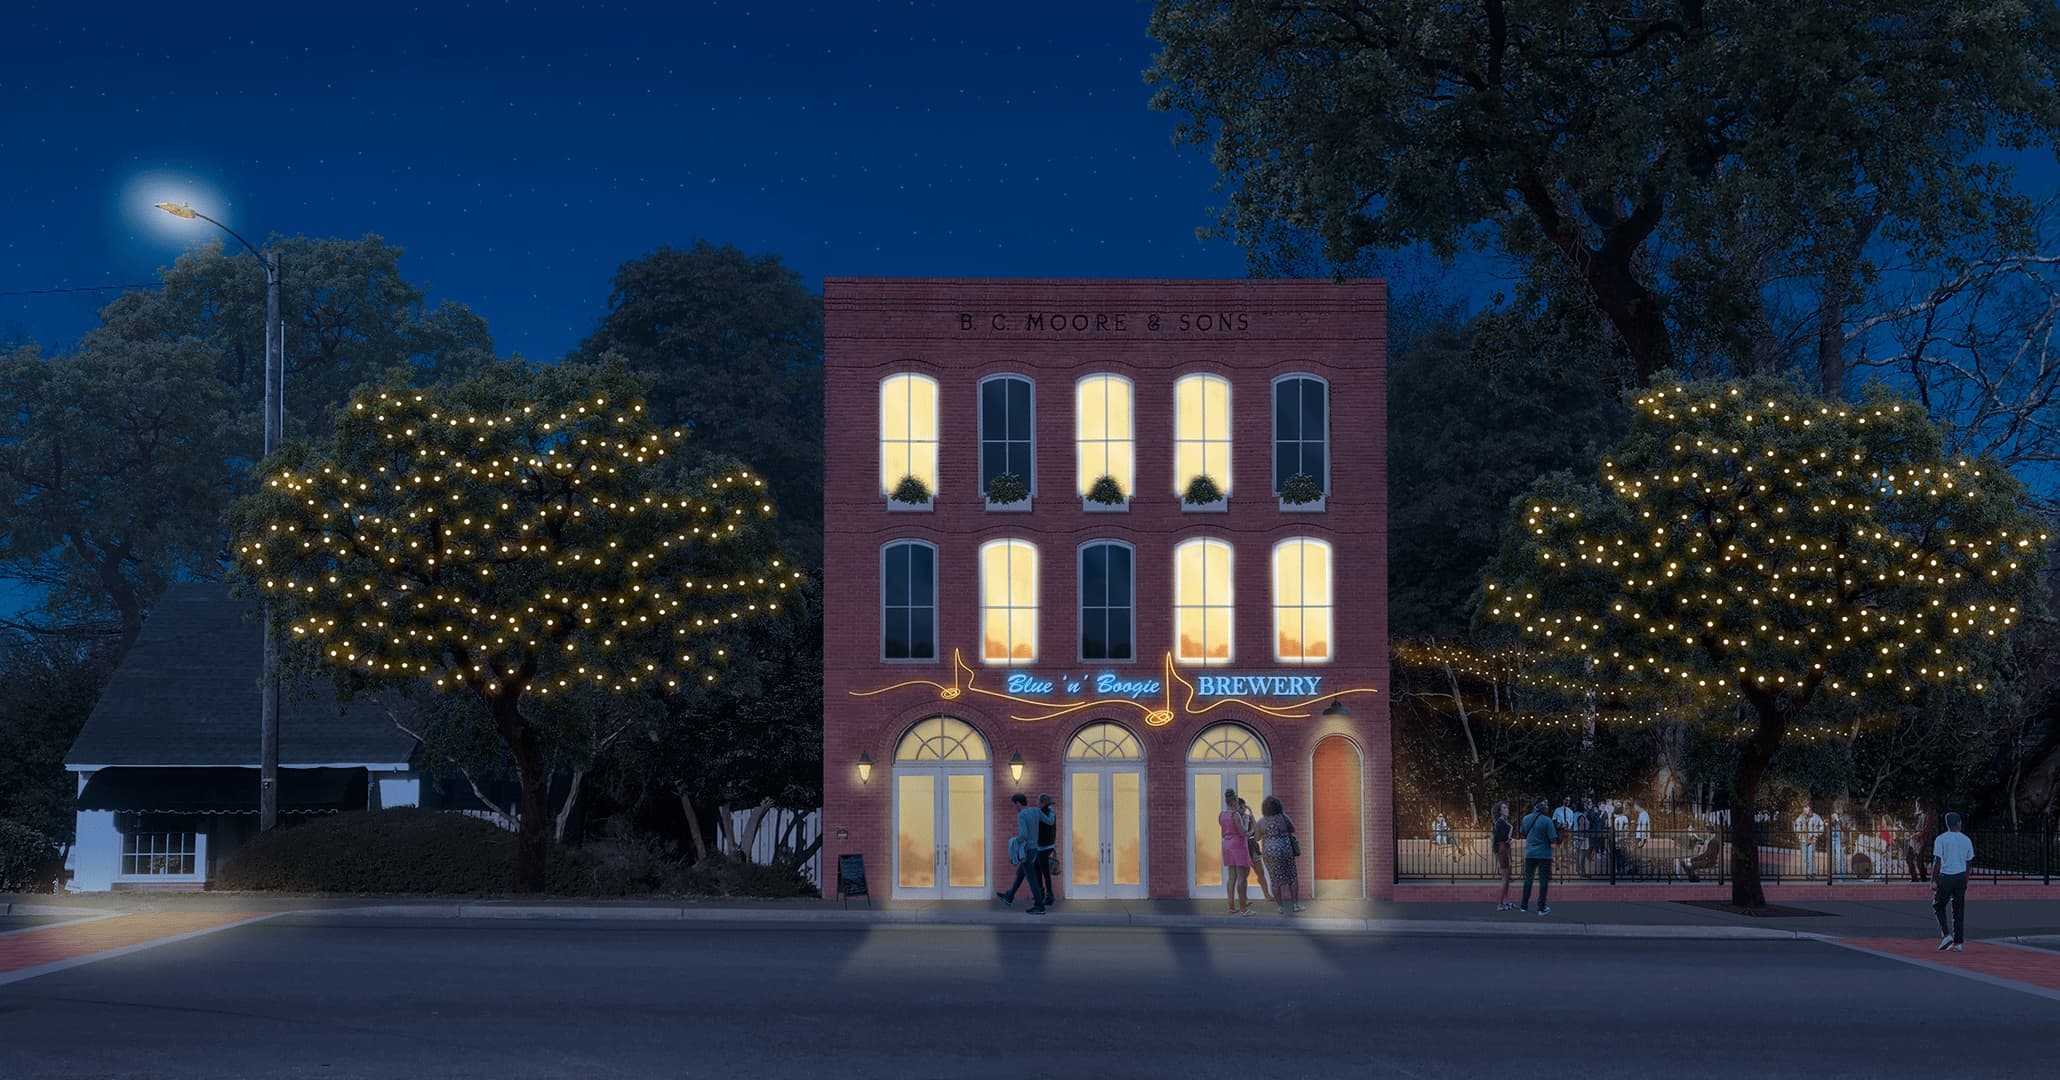 Boudreaux planning department got community feedback and designed night time shots of downtown.